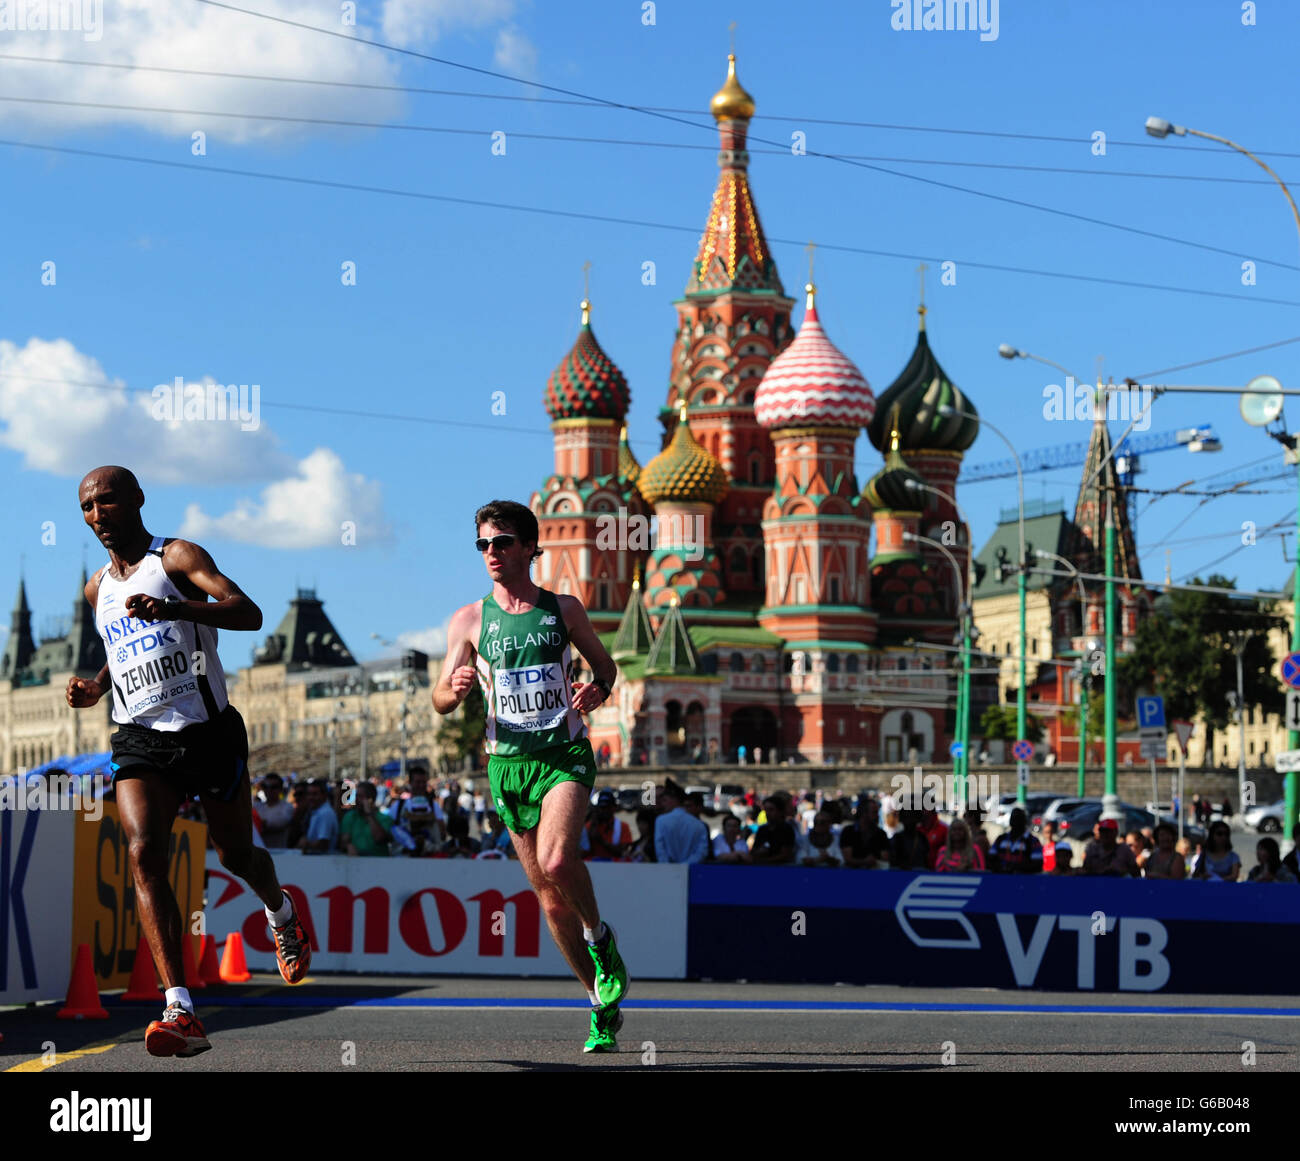 Ireland's Paul Pollock in action during the Men's Marathon on day eight of the 2013 IAAF World Athletics Championships at the Luzhniki Stadium in Moscow, Russia. PRESS ASSOCIATION Photo. Picture date: Saturday August 17, 2013. See PA story ATHLETICS World. Photo credit should read: Adam Davy/PA Wire. RESTRICTIONS: Editorial use only. No transmission of sound or moving images. Call 44 (0)1158 447447 for further information.on day six of the 2013 IAAF World Athletics Championships at the Luzhniki Stadium in Moscow, Russia. PRESS ASSOCIATION Photo. Picture date: Thursday August 15, 2013. See PA Stock Photo